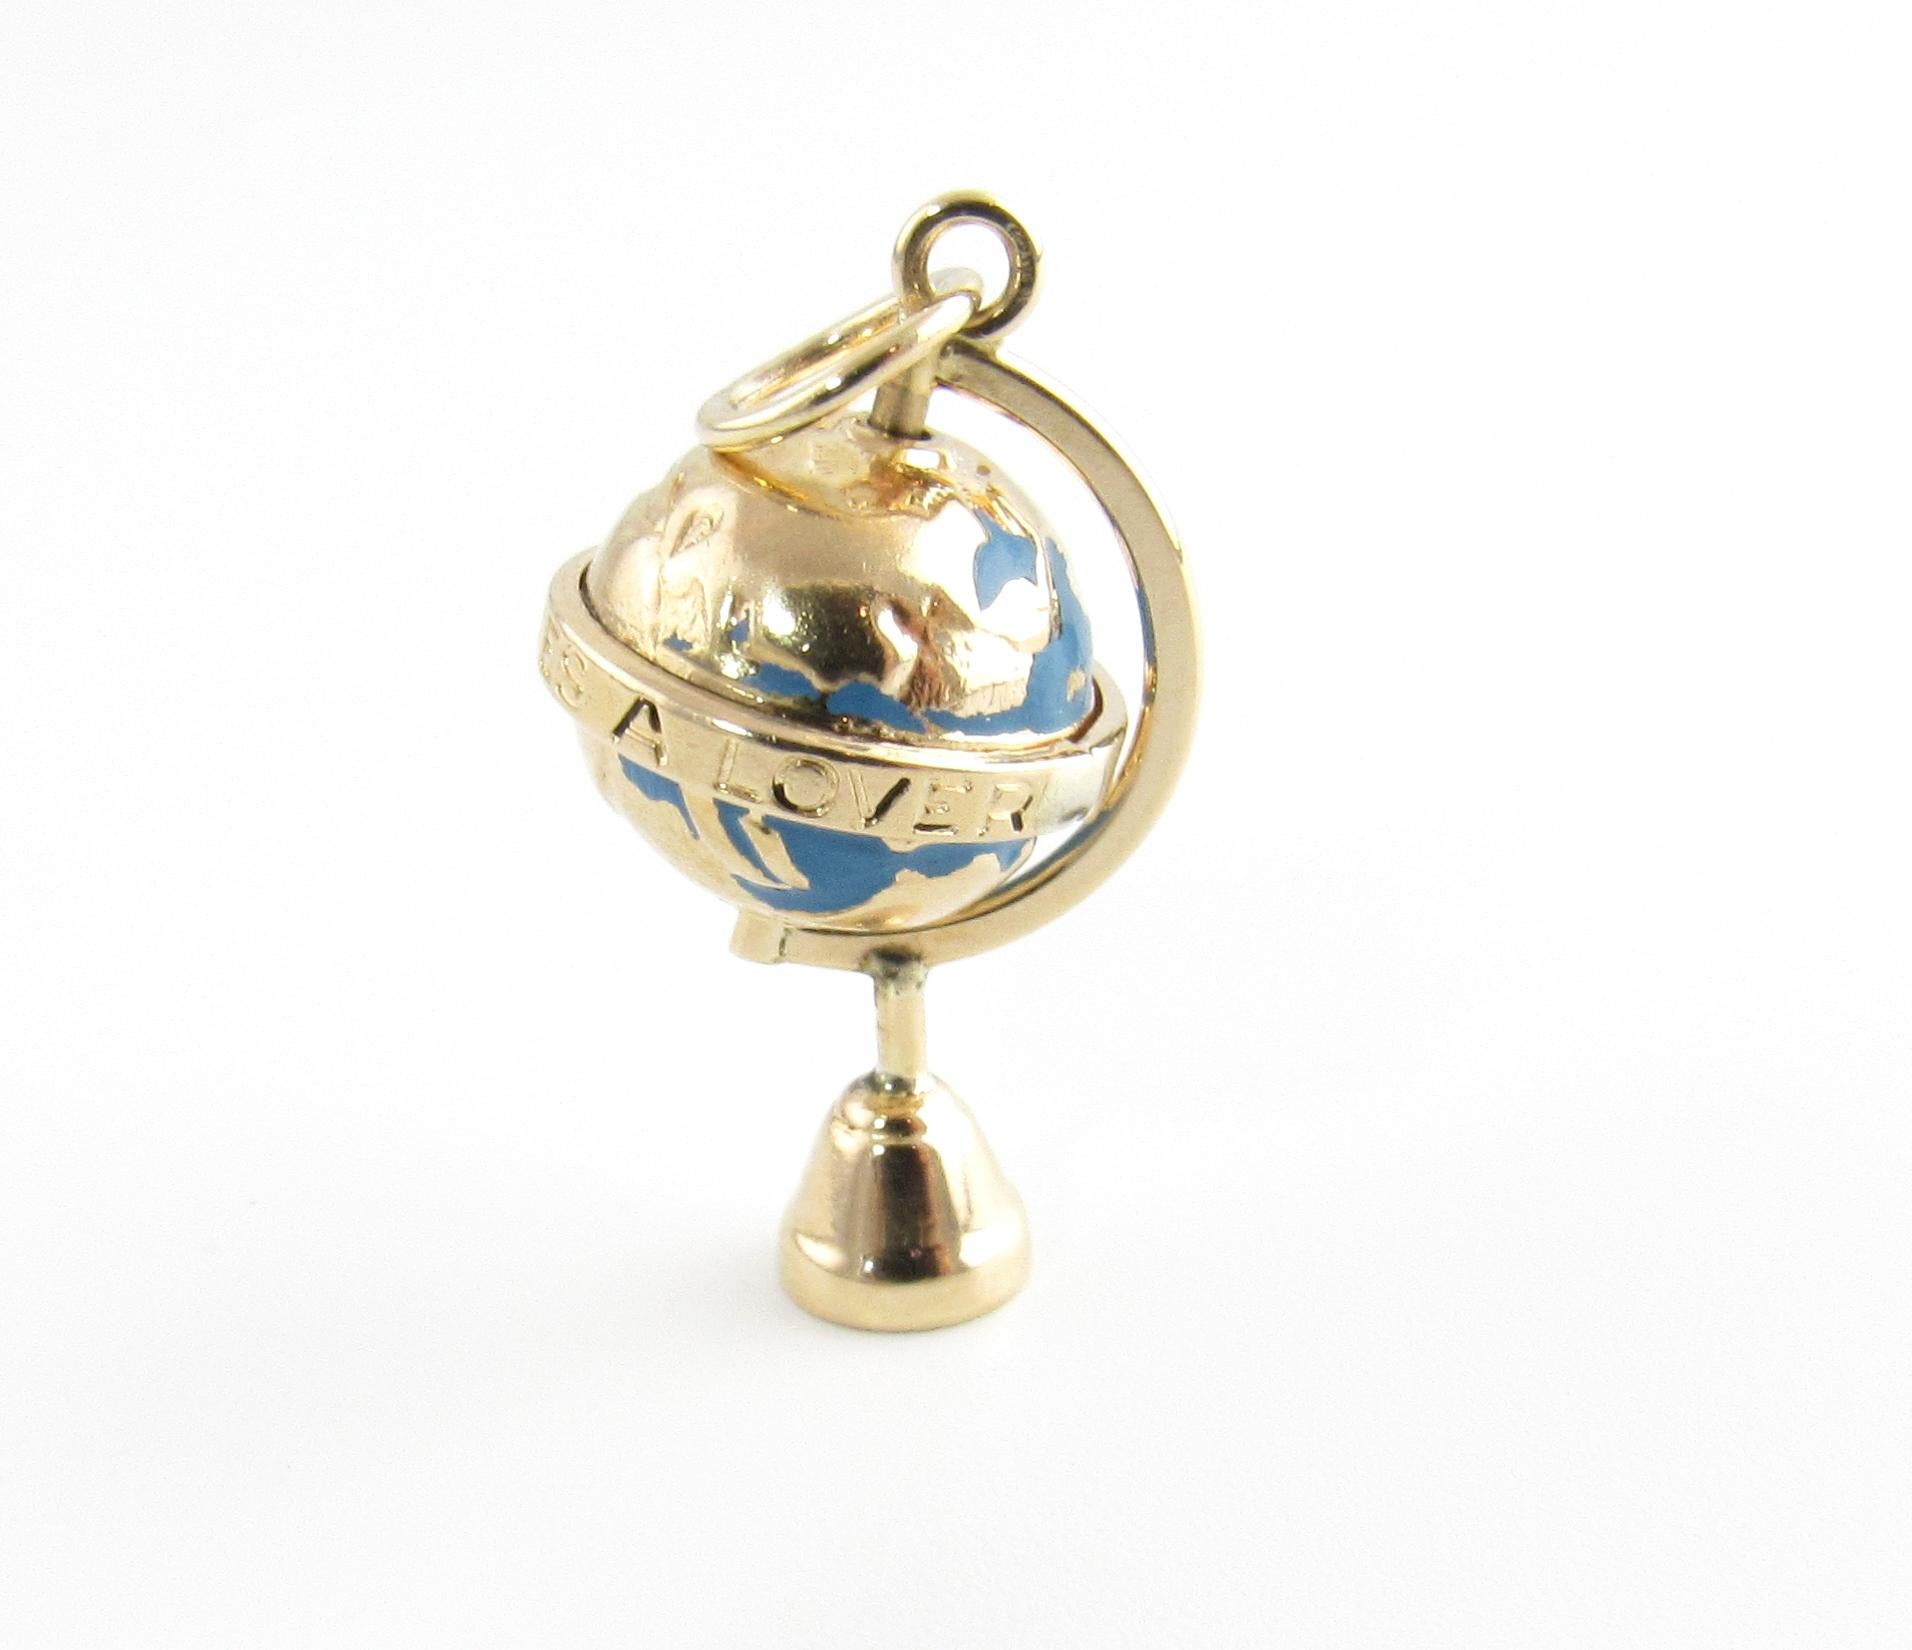 Vintage 14 Karat Yellow Gold Globe Charm

Take a trip around the world!

This lovely 3D charm features a miniature spinning globe accented with blue enamel and crafted in beautifully detailed 14K yellow gold.

